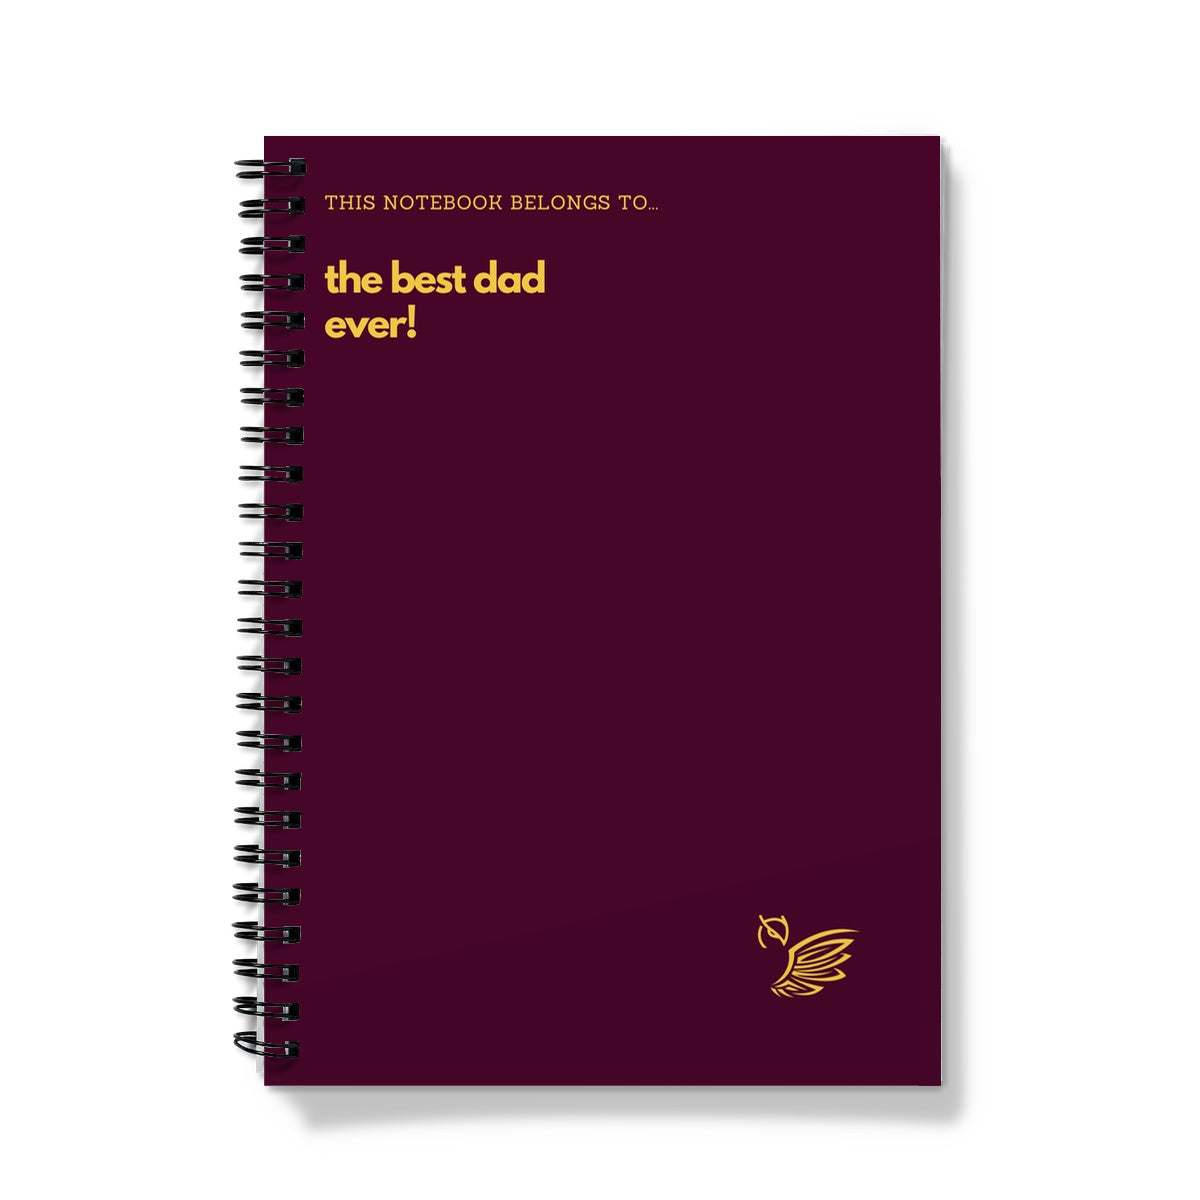 This Notebook Belongs To... The Best Dad Ever - Red Notebook